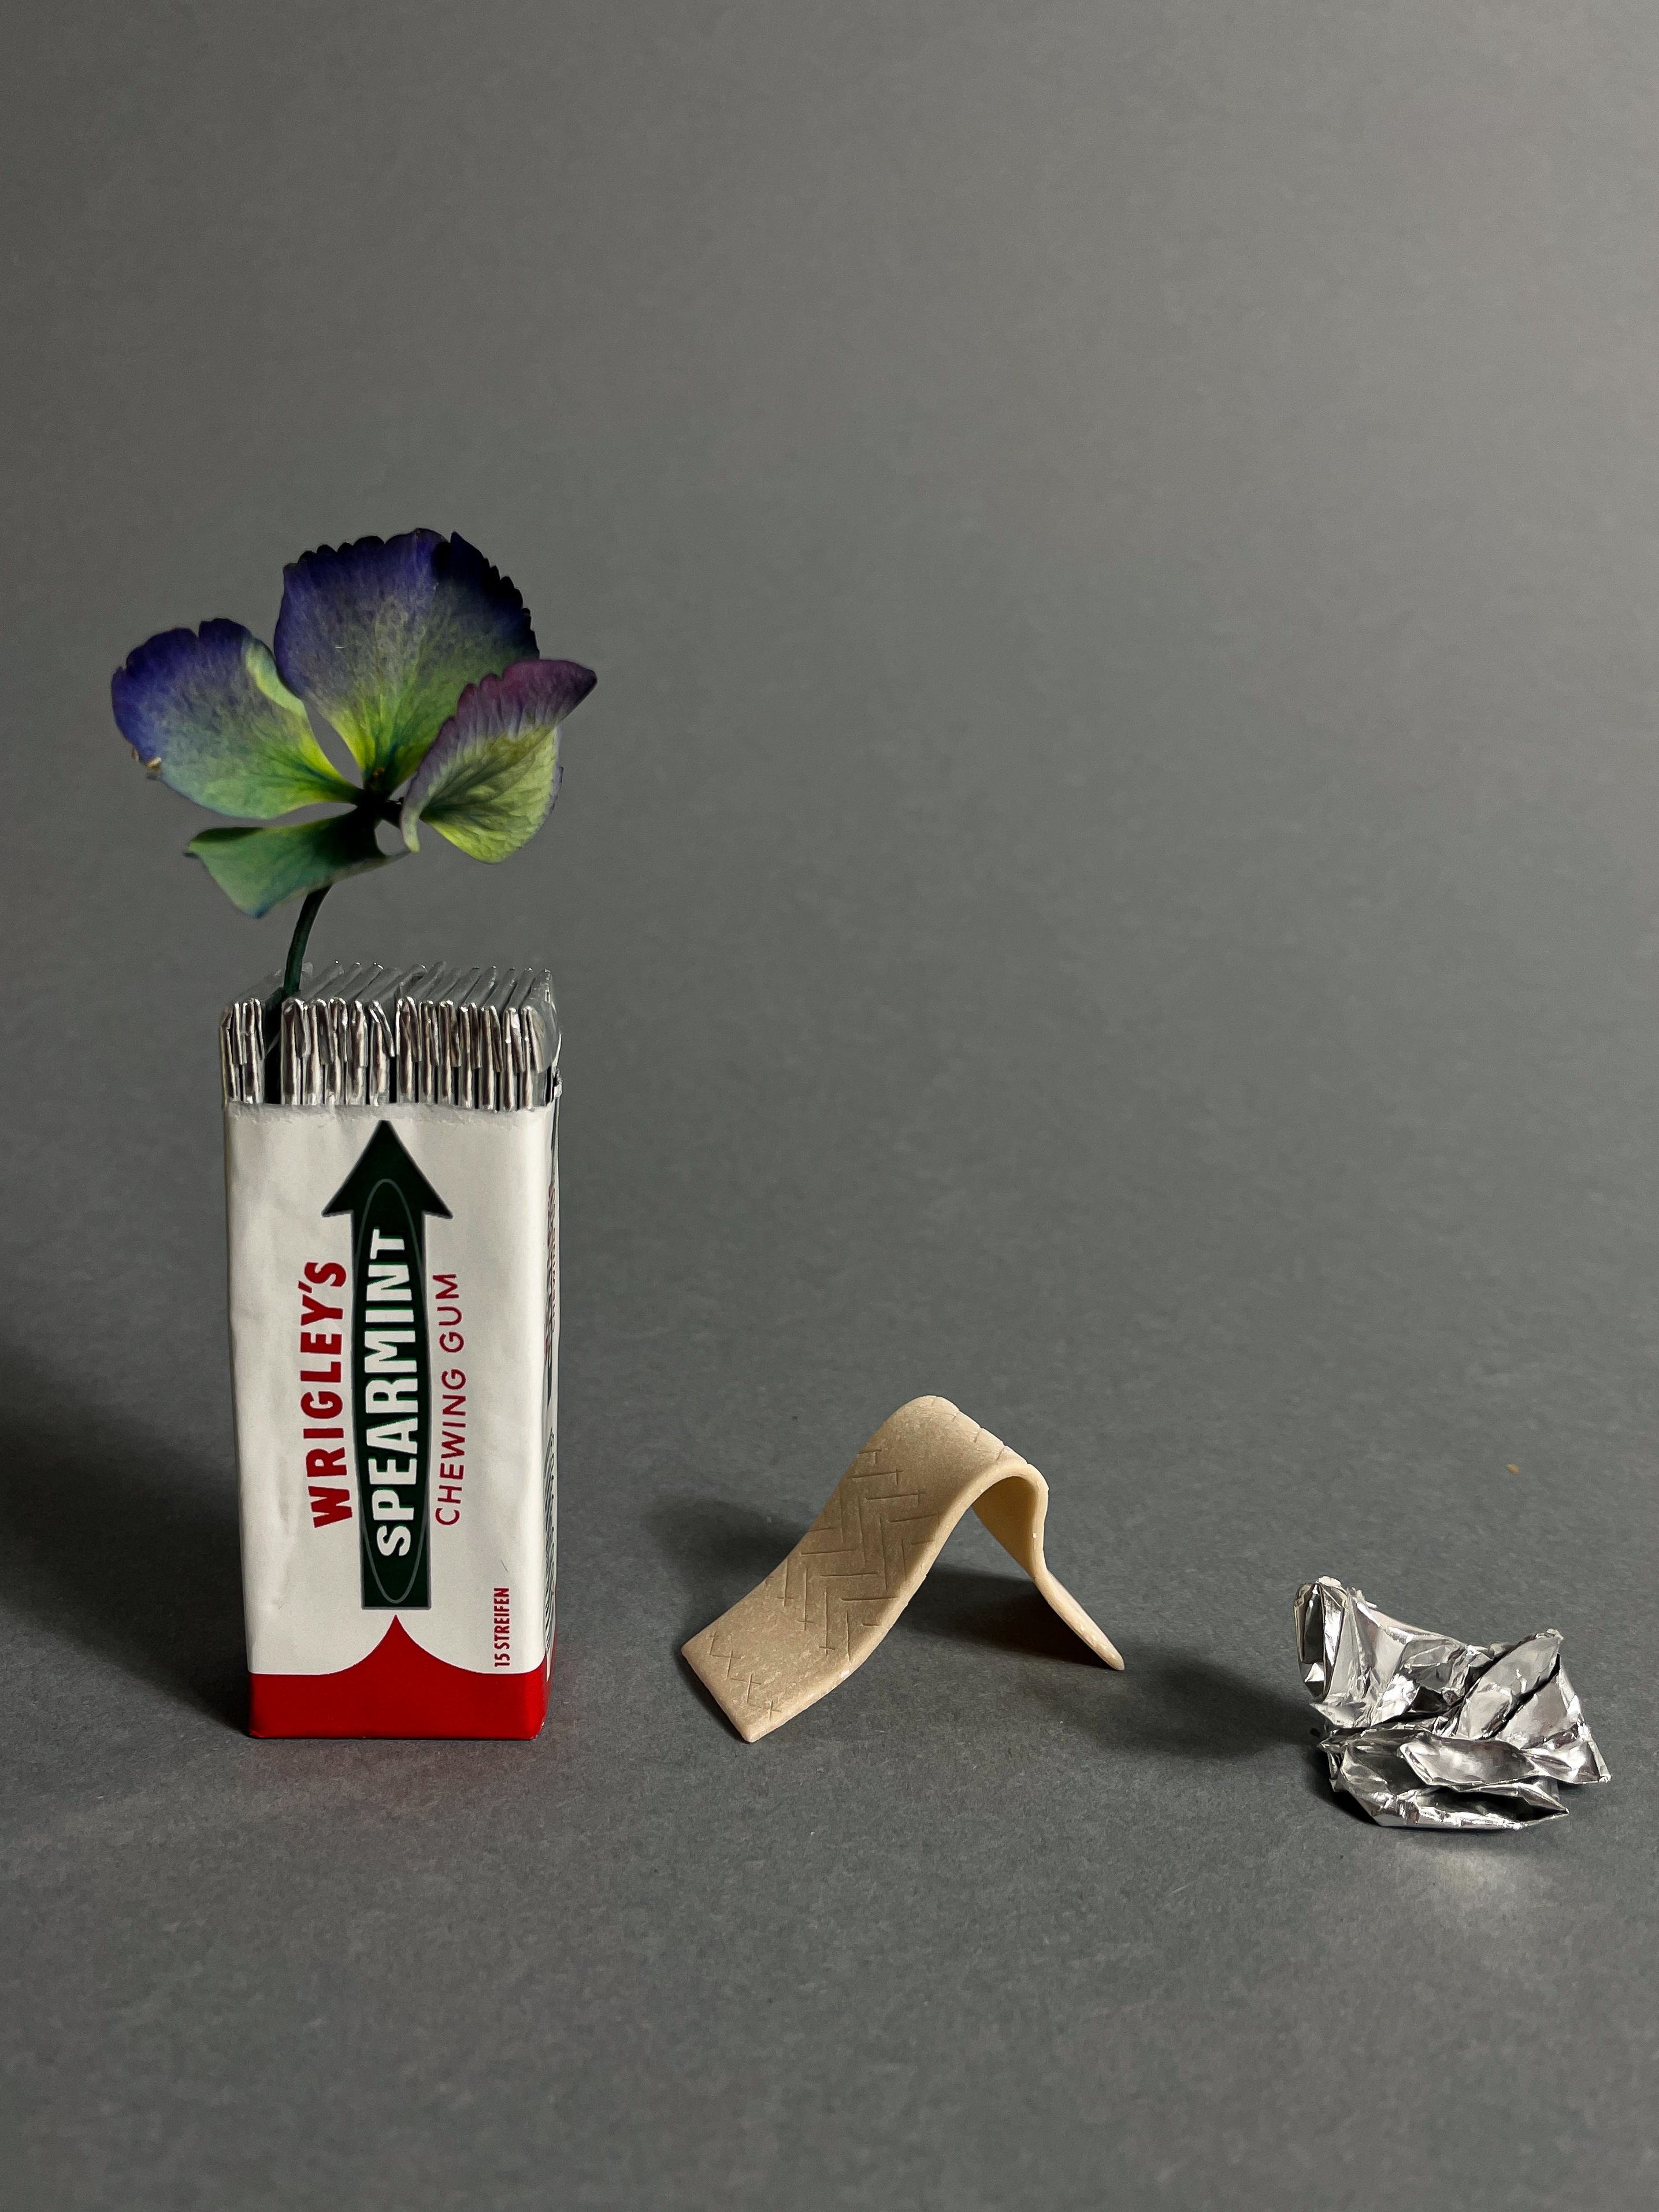 Chewing gum package with an unfolded stripe and hortensia